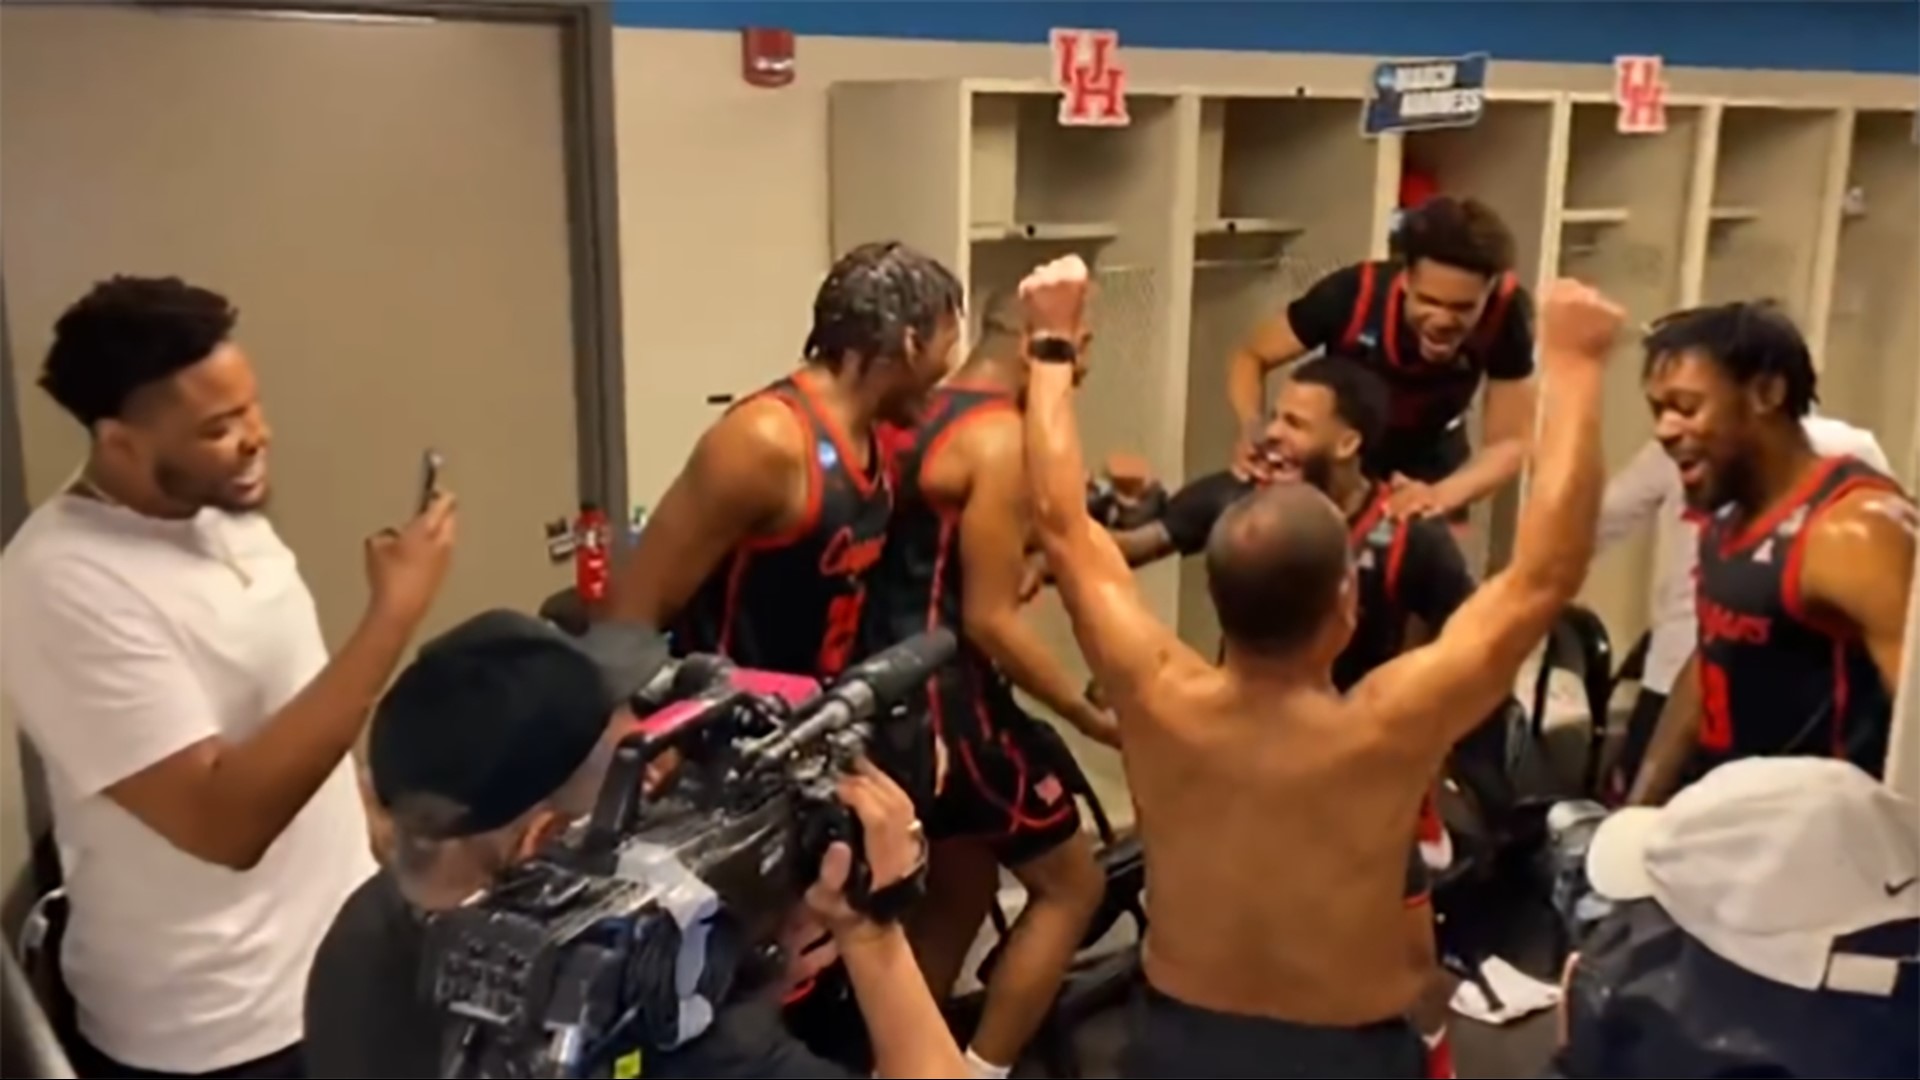 After knocking off Illinois, Houston's head coach showed his joy in the locker room.